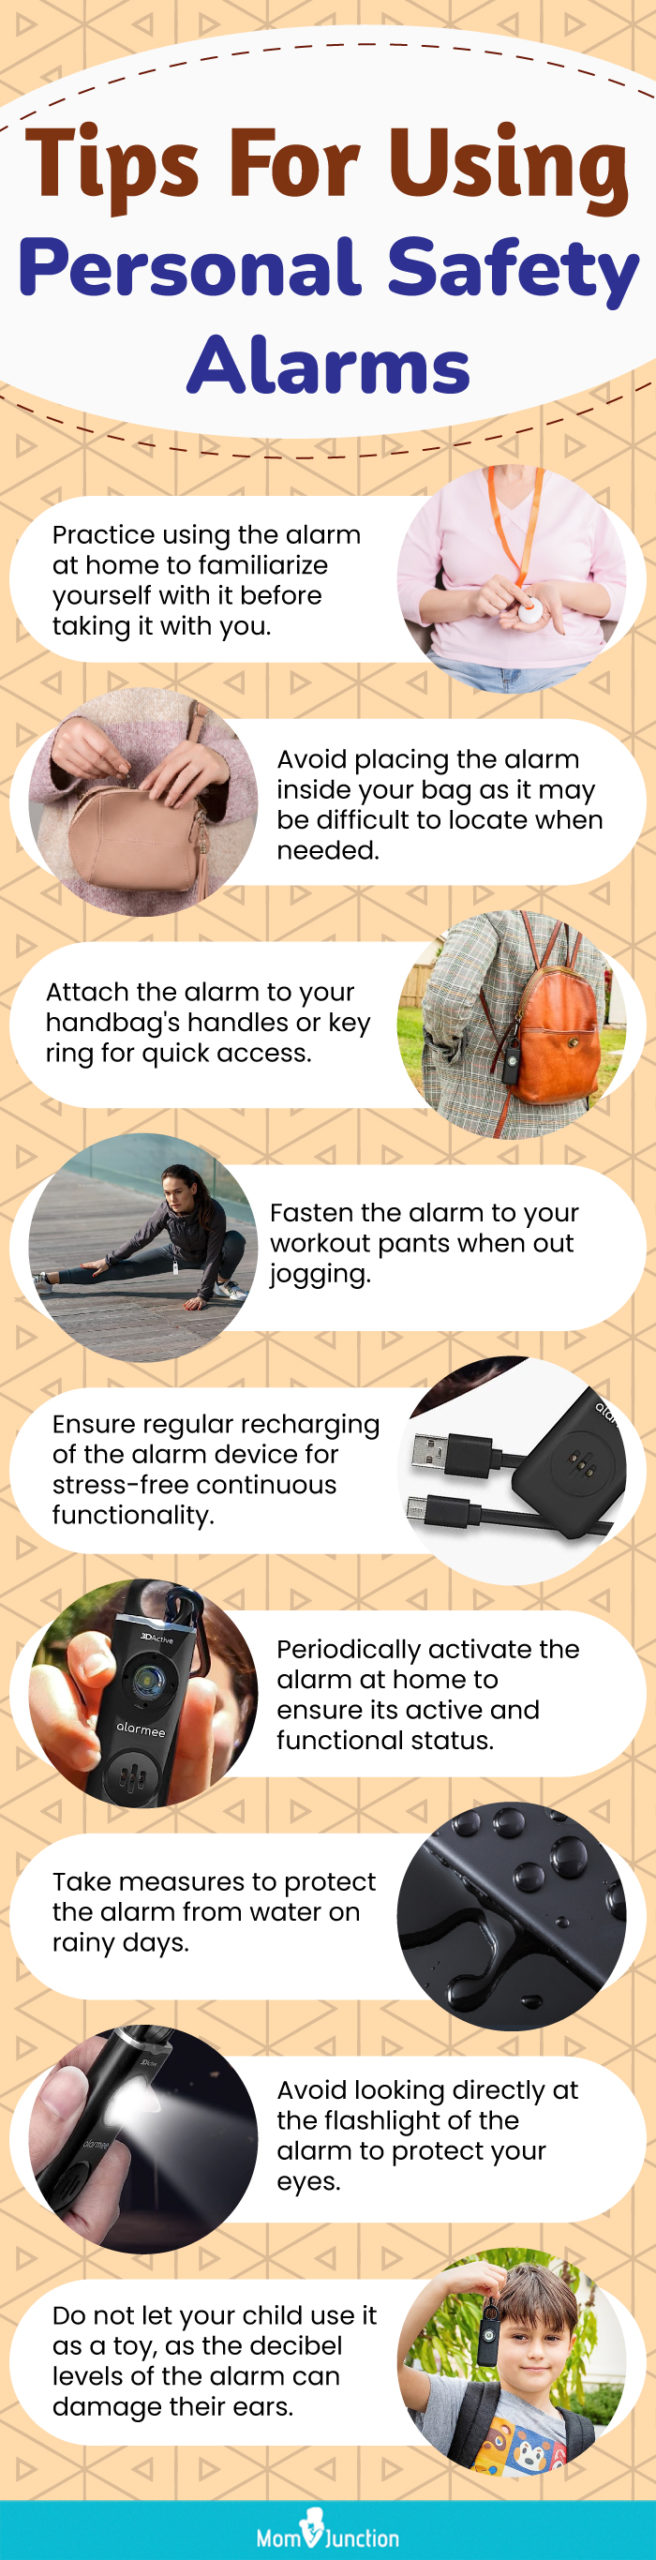 Tips For Using Personal Safety Alarms (infographic)